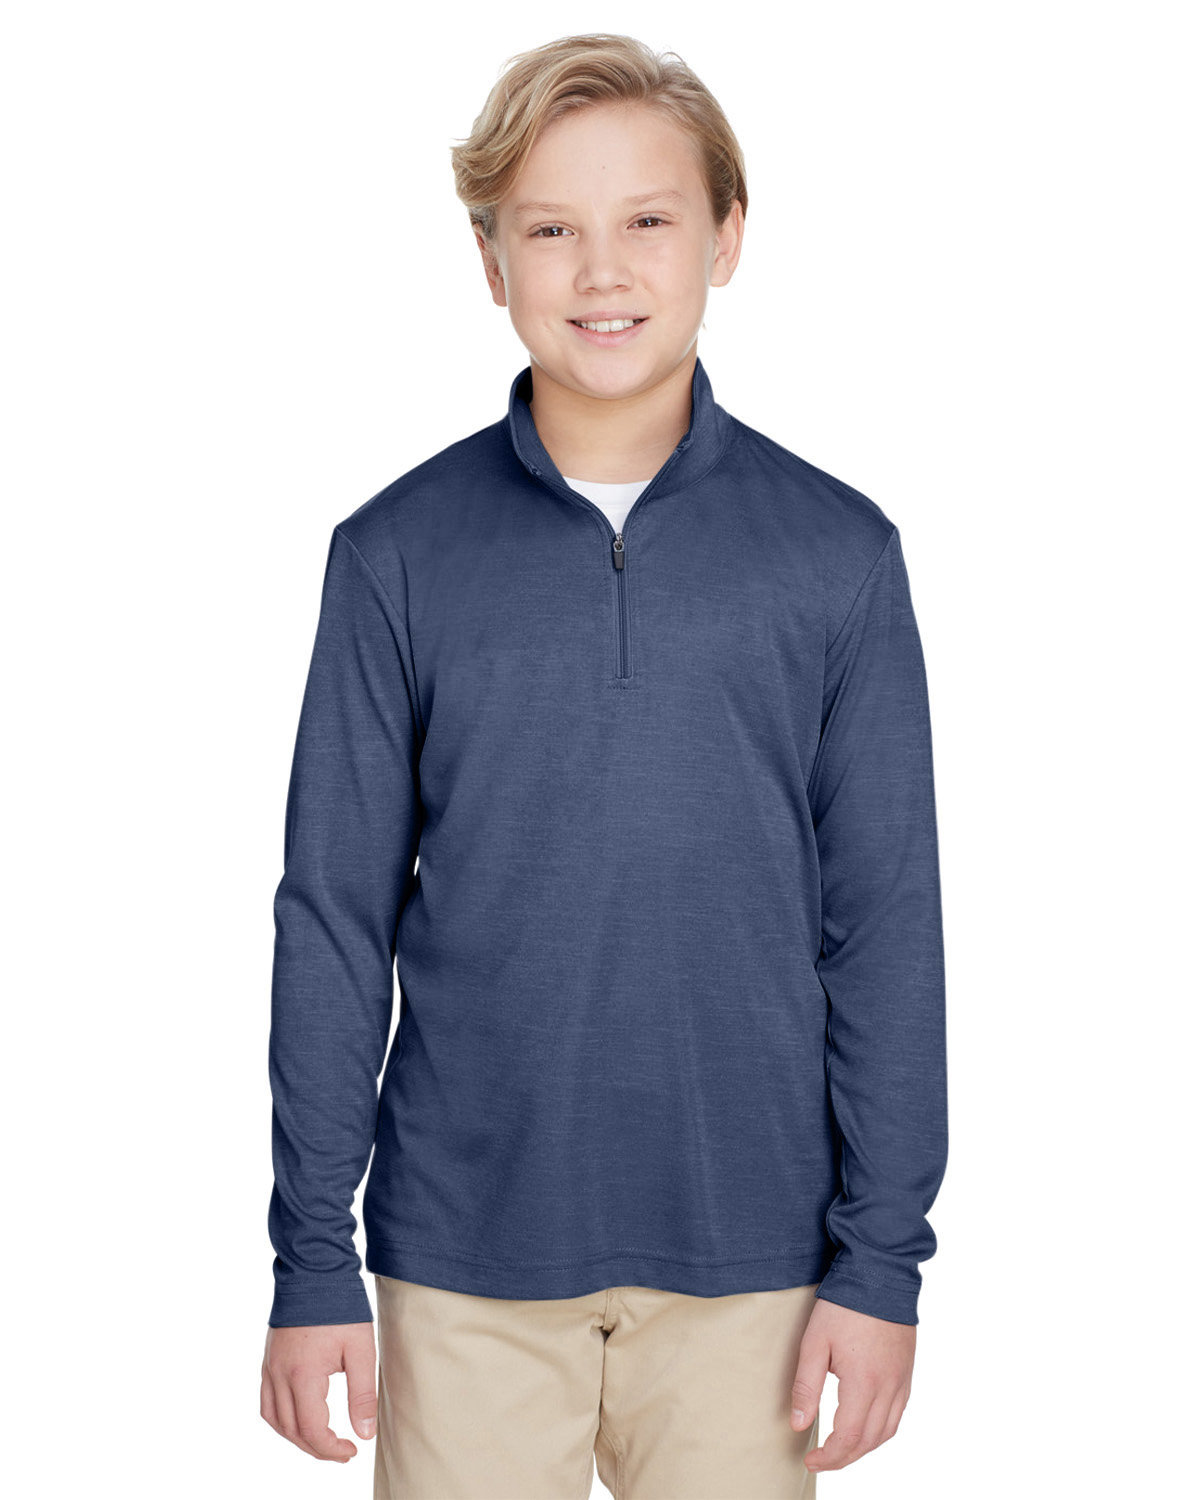 Team 365 Youth Zone Sonic Heather Performance Quarter-Zip SP DRK NVY HTH 